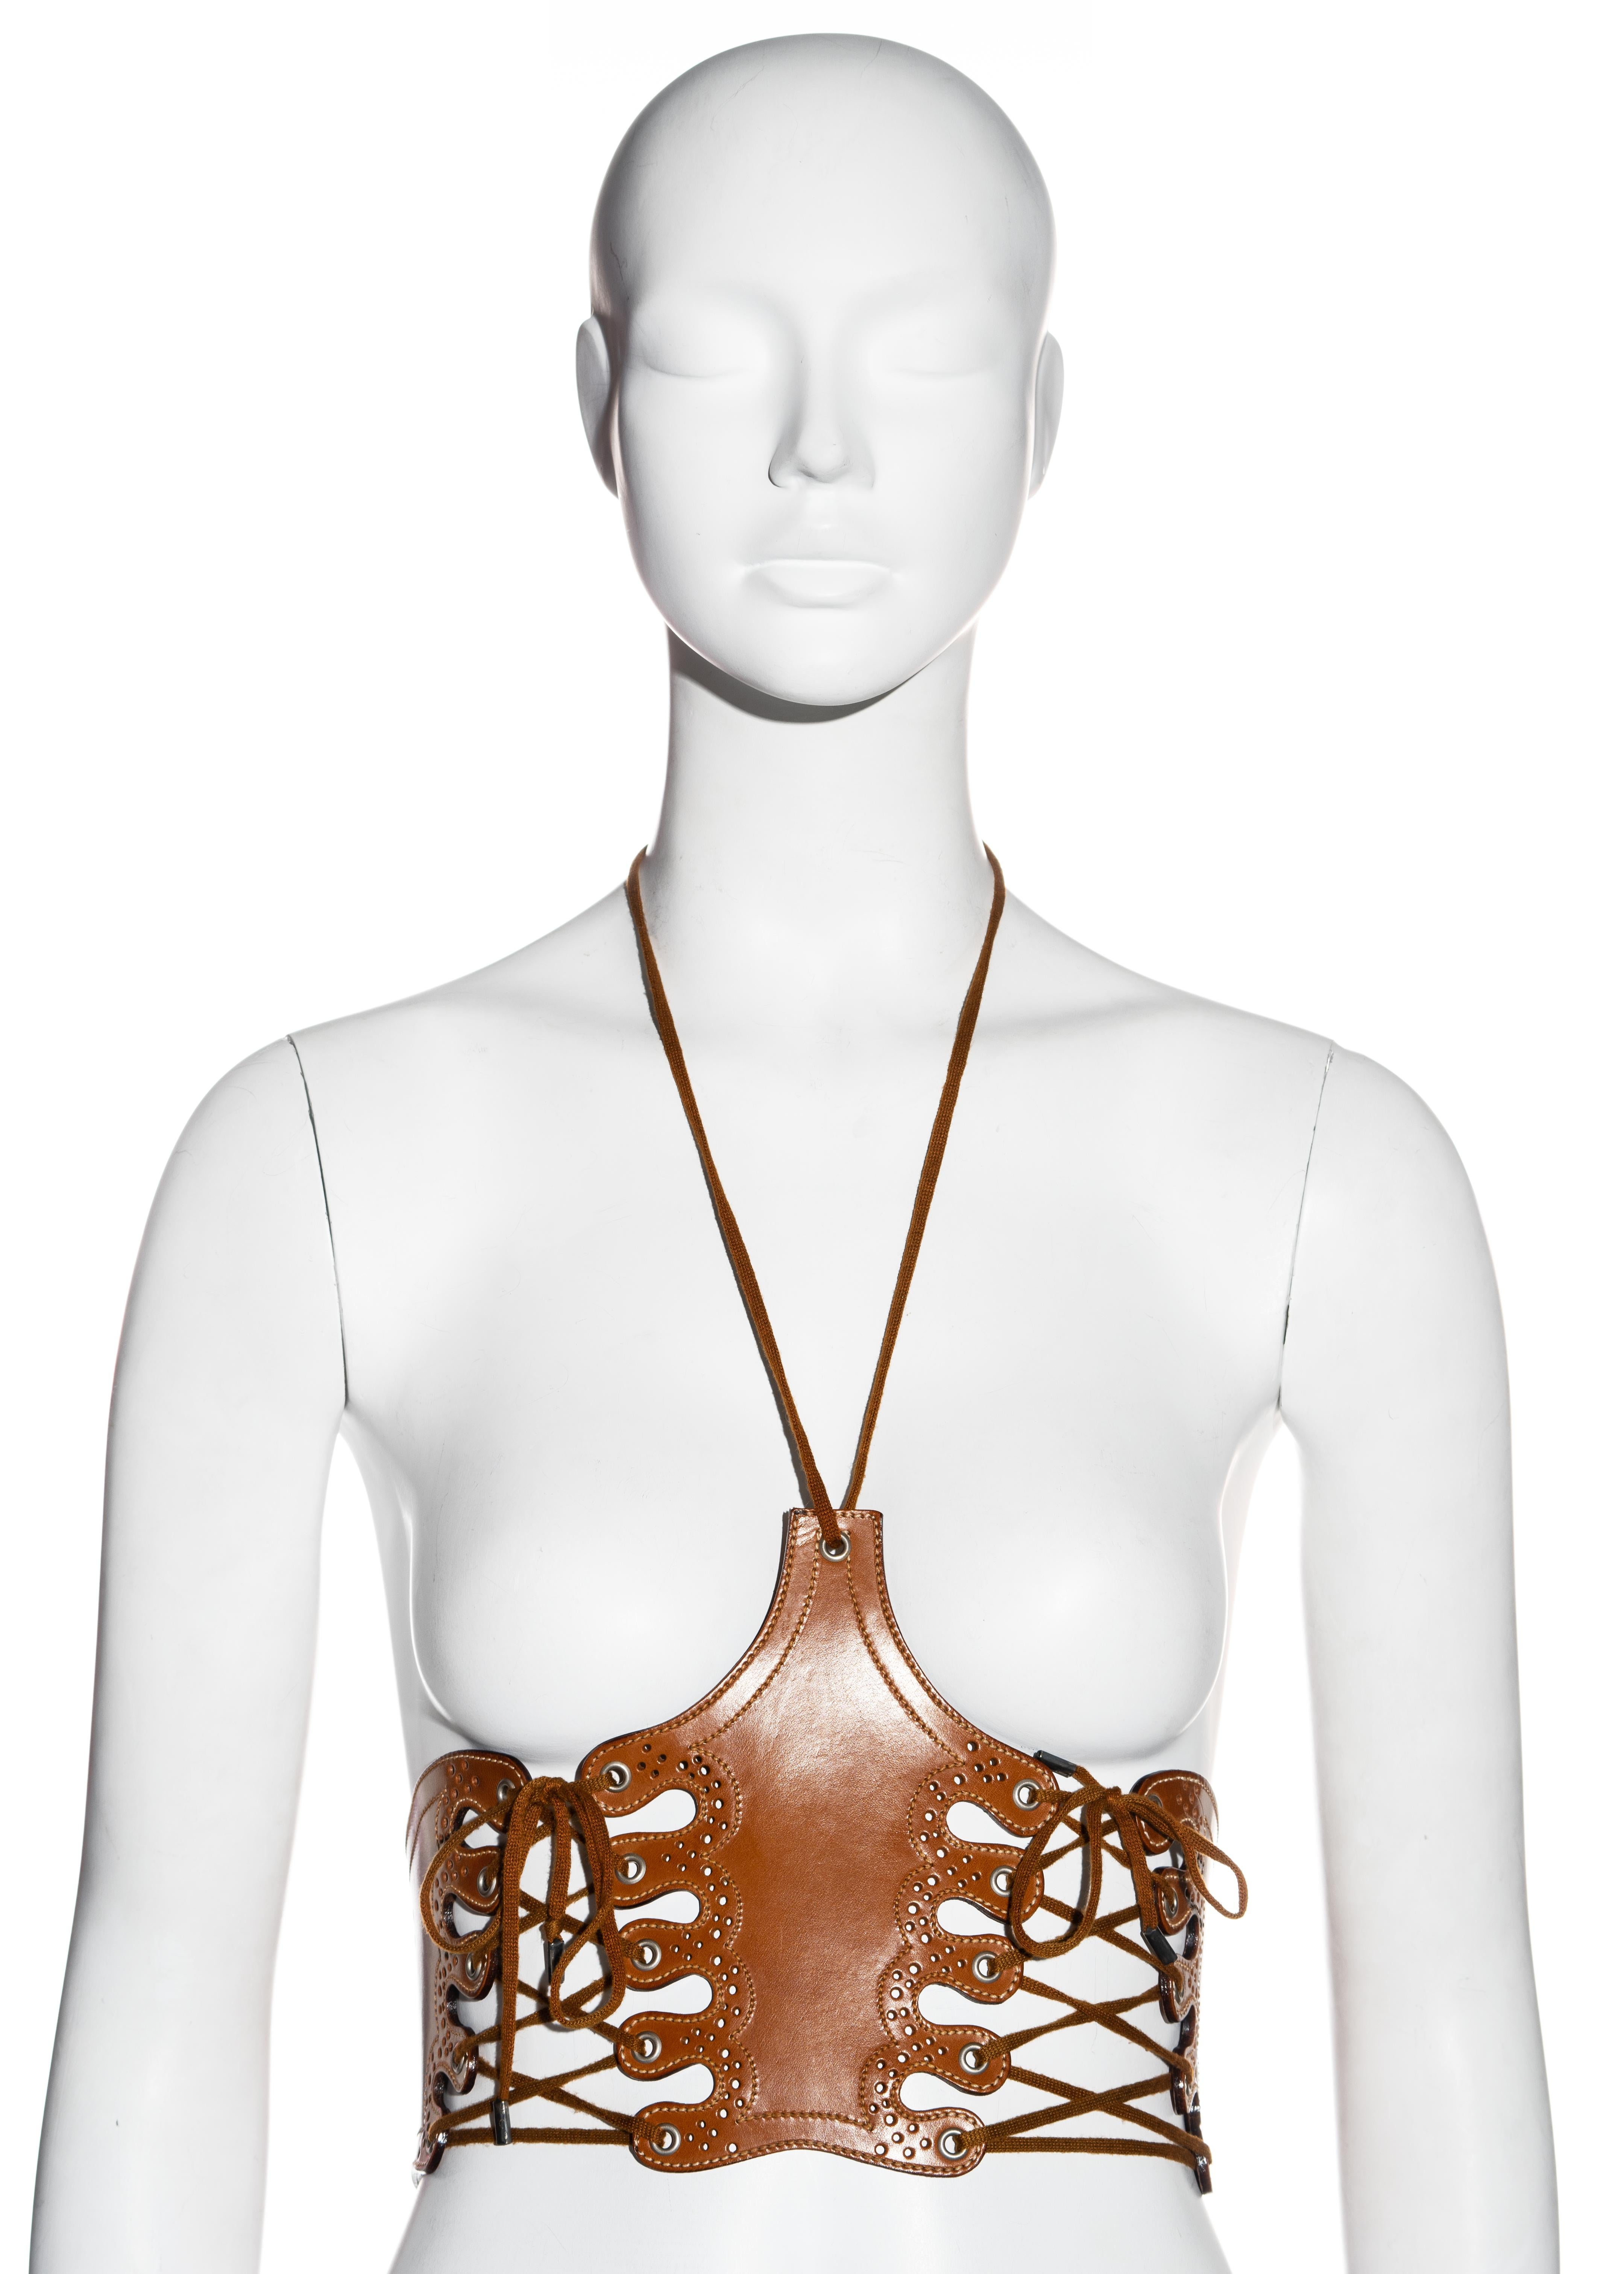 ▪ Jean Paul Gaultier tan leather corset with halter 
▪ Skin baring openings with lacing 
▪ Western-style details 
▪ IT 42 - FR 38 - UK 10 (sizing is flexible)
▪ Spring-Summer 2004